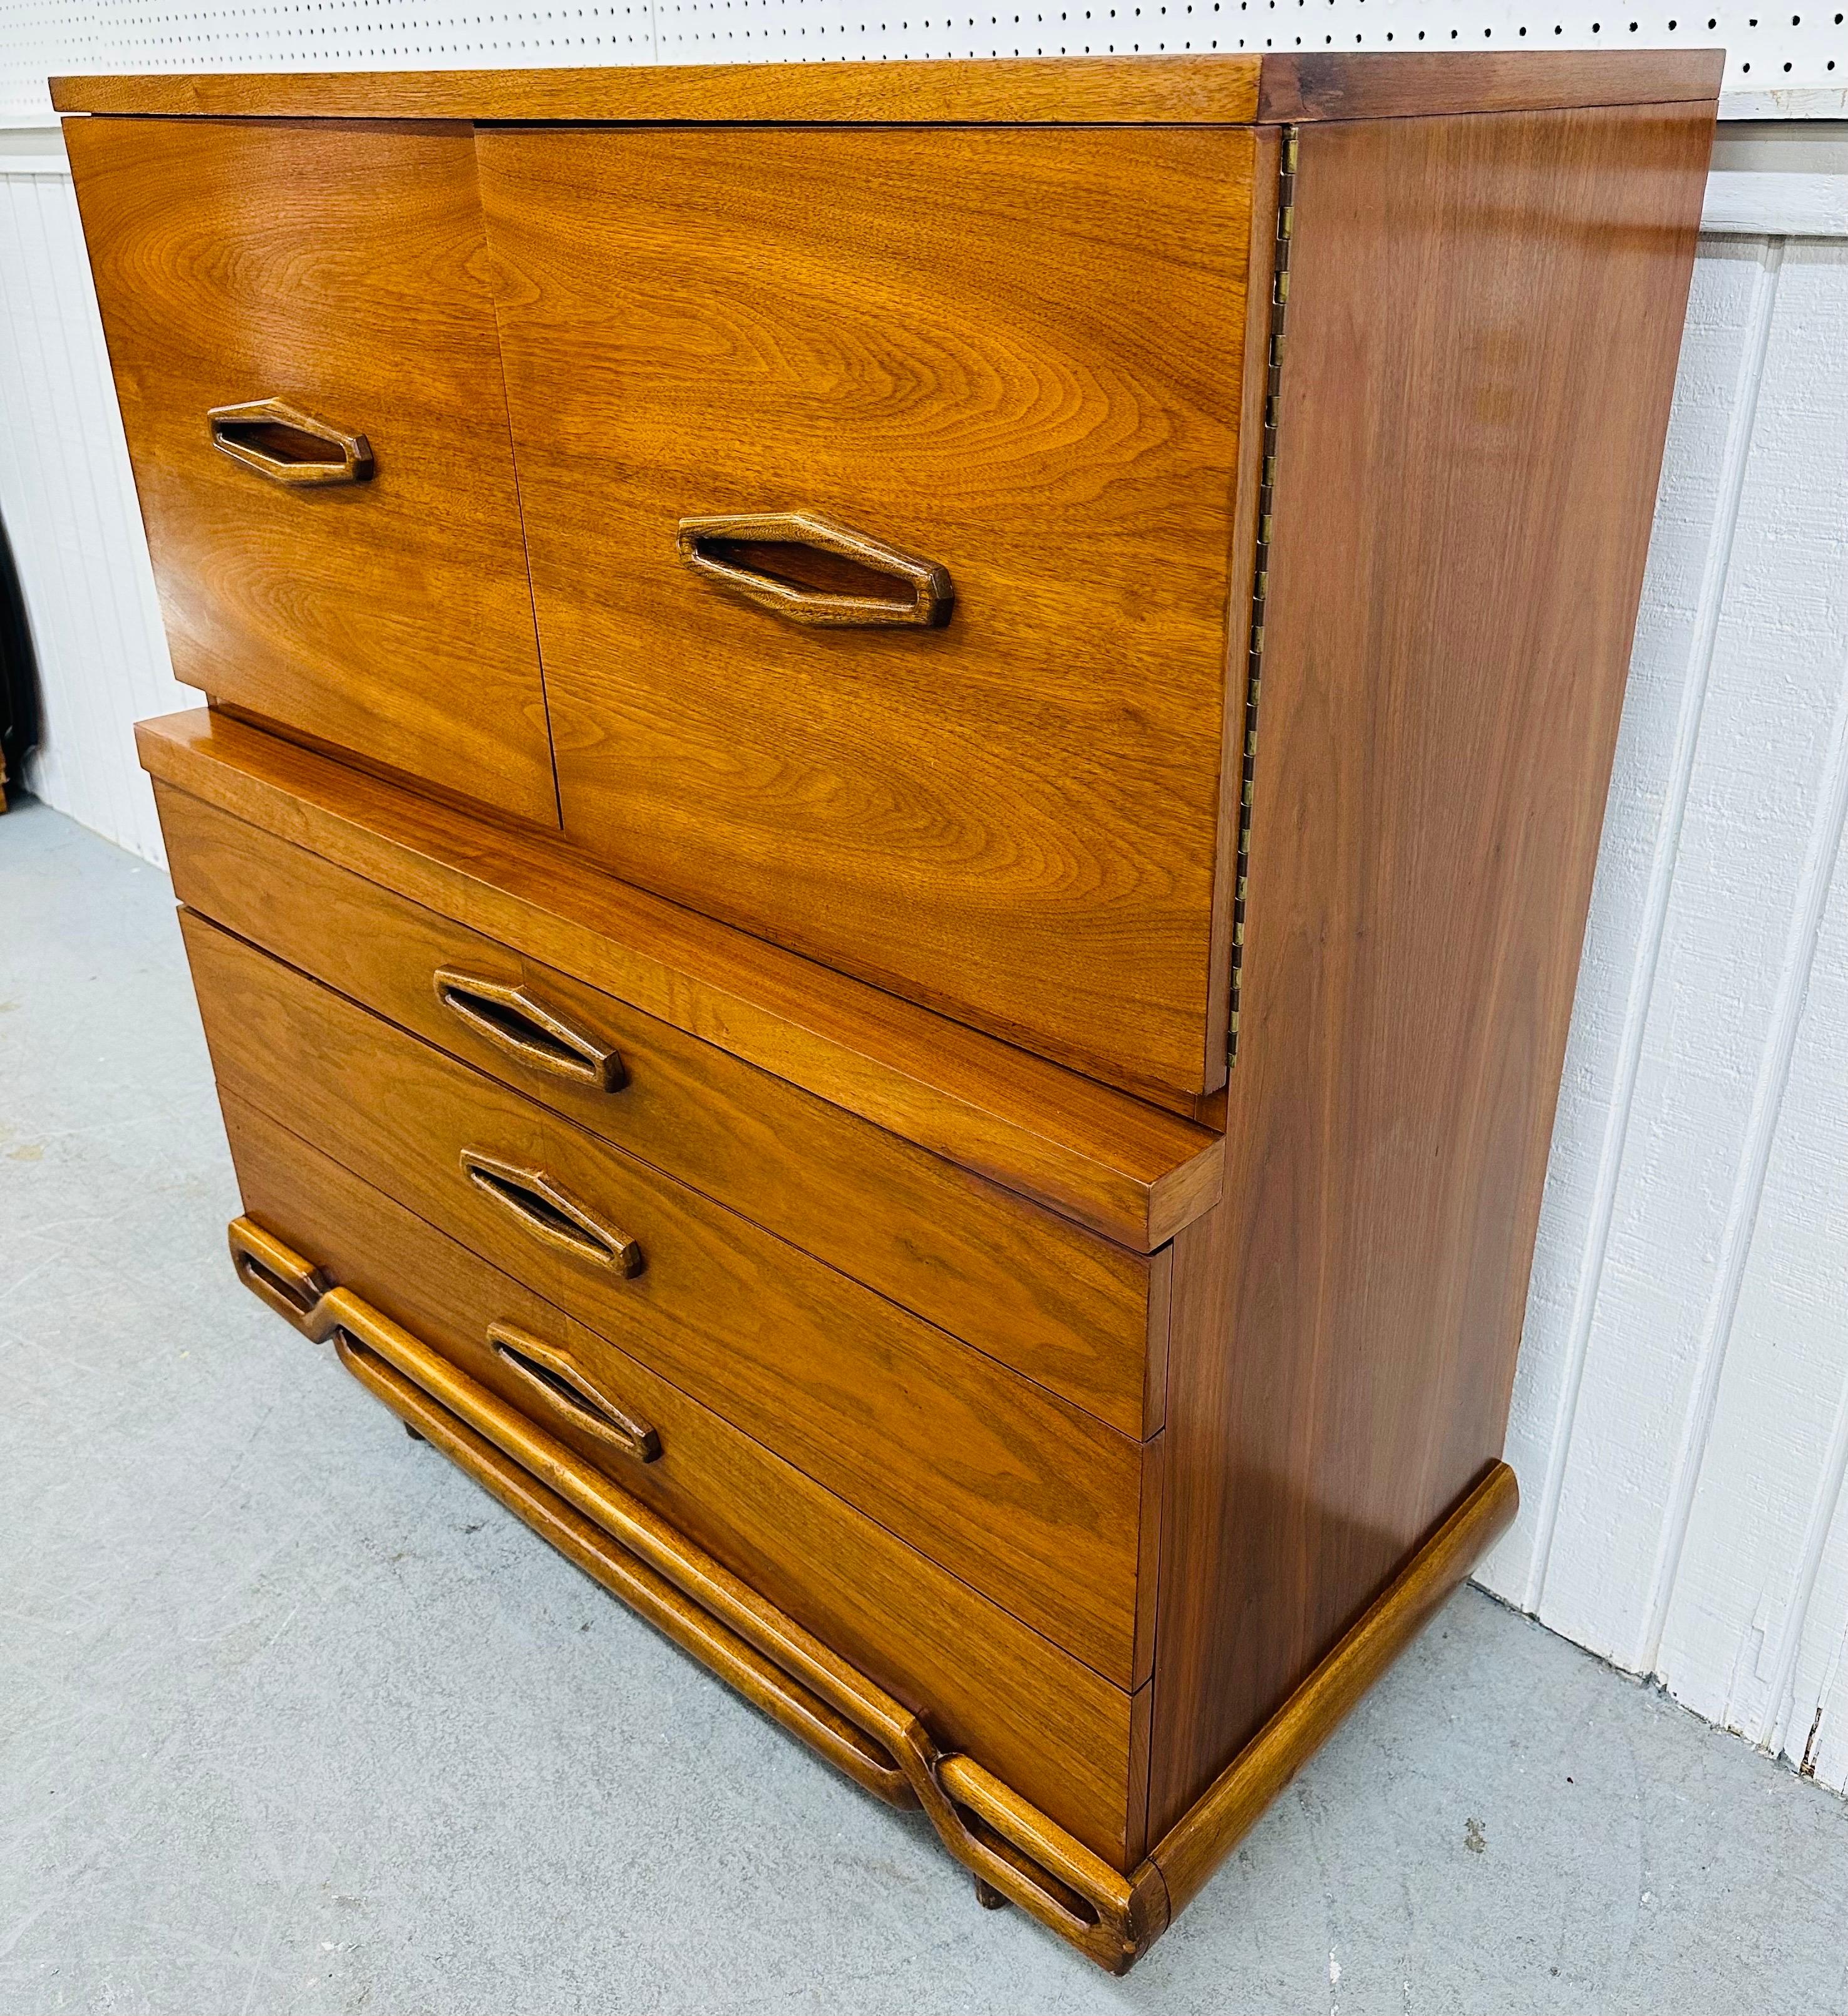 This listing is for a Mid-Century Modern Walnut High Chest. Featuring a straight line design, two doors with recessed wooden pulls, two large hidden drawers, three more larger drawers at the bottom, modern legs, and a beautiful walnut finish.